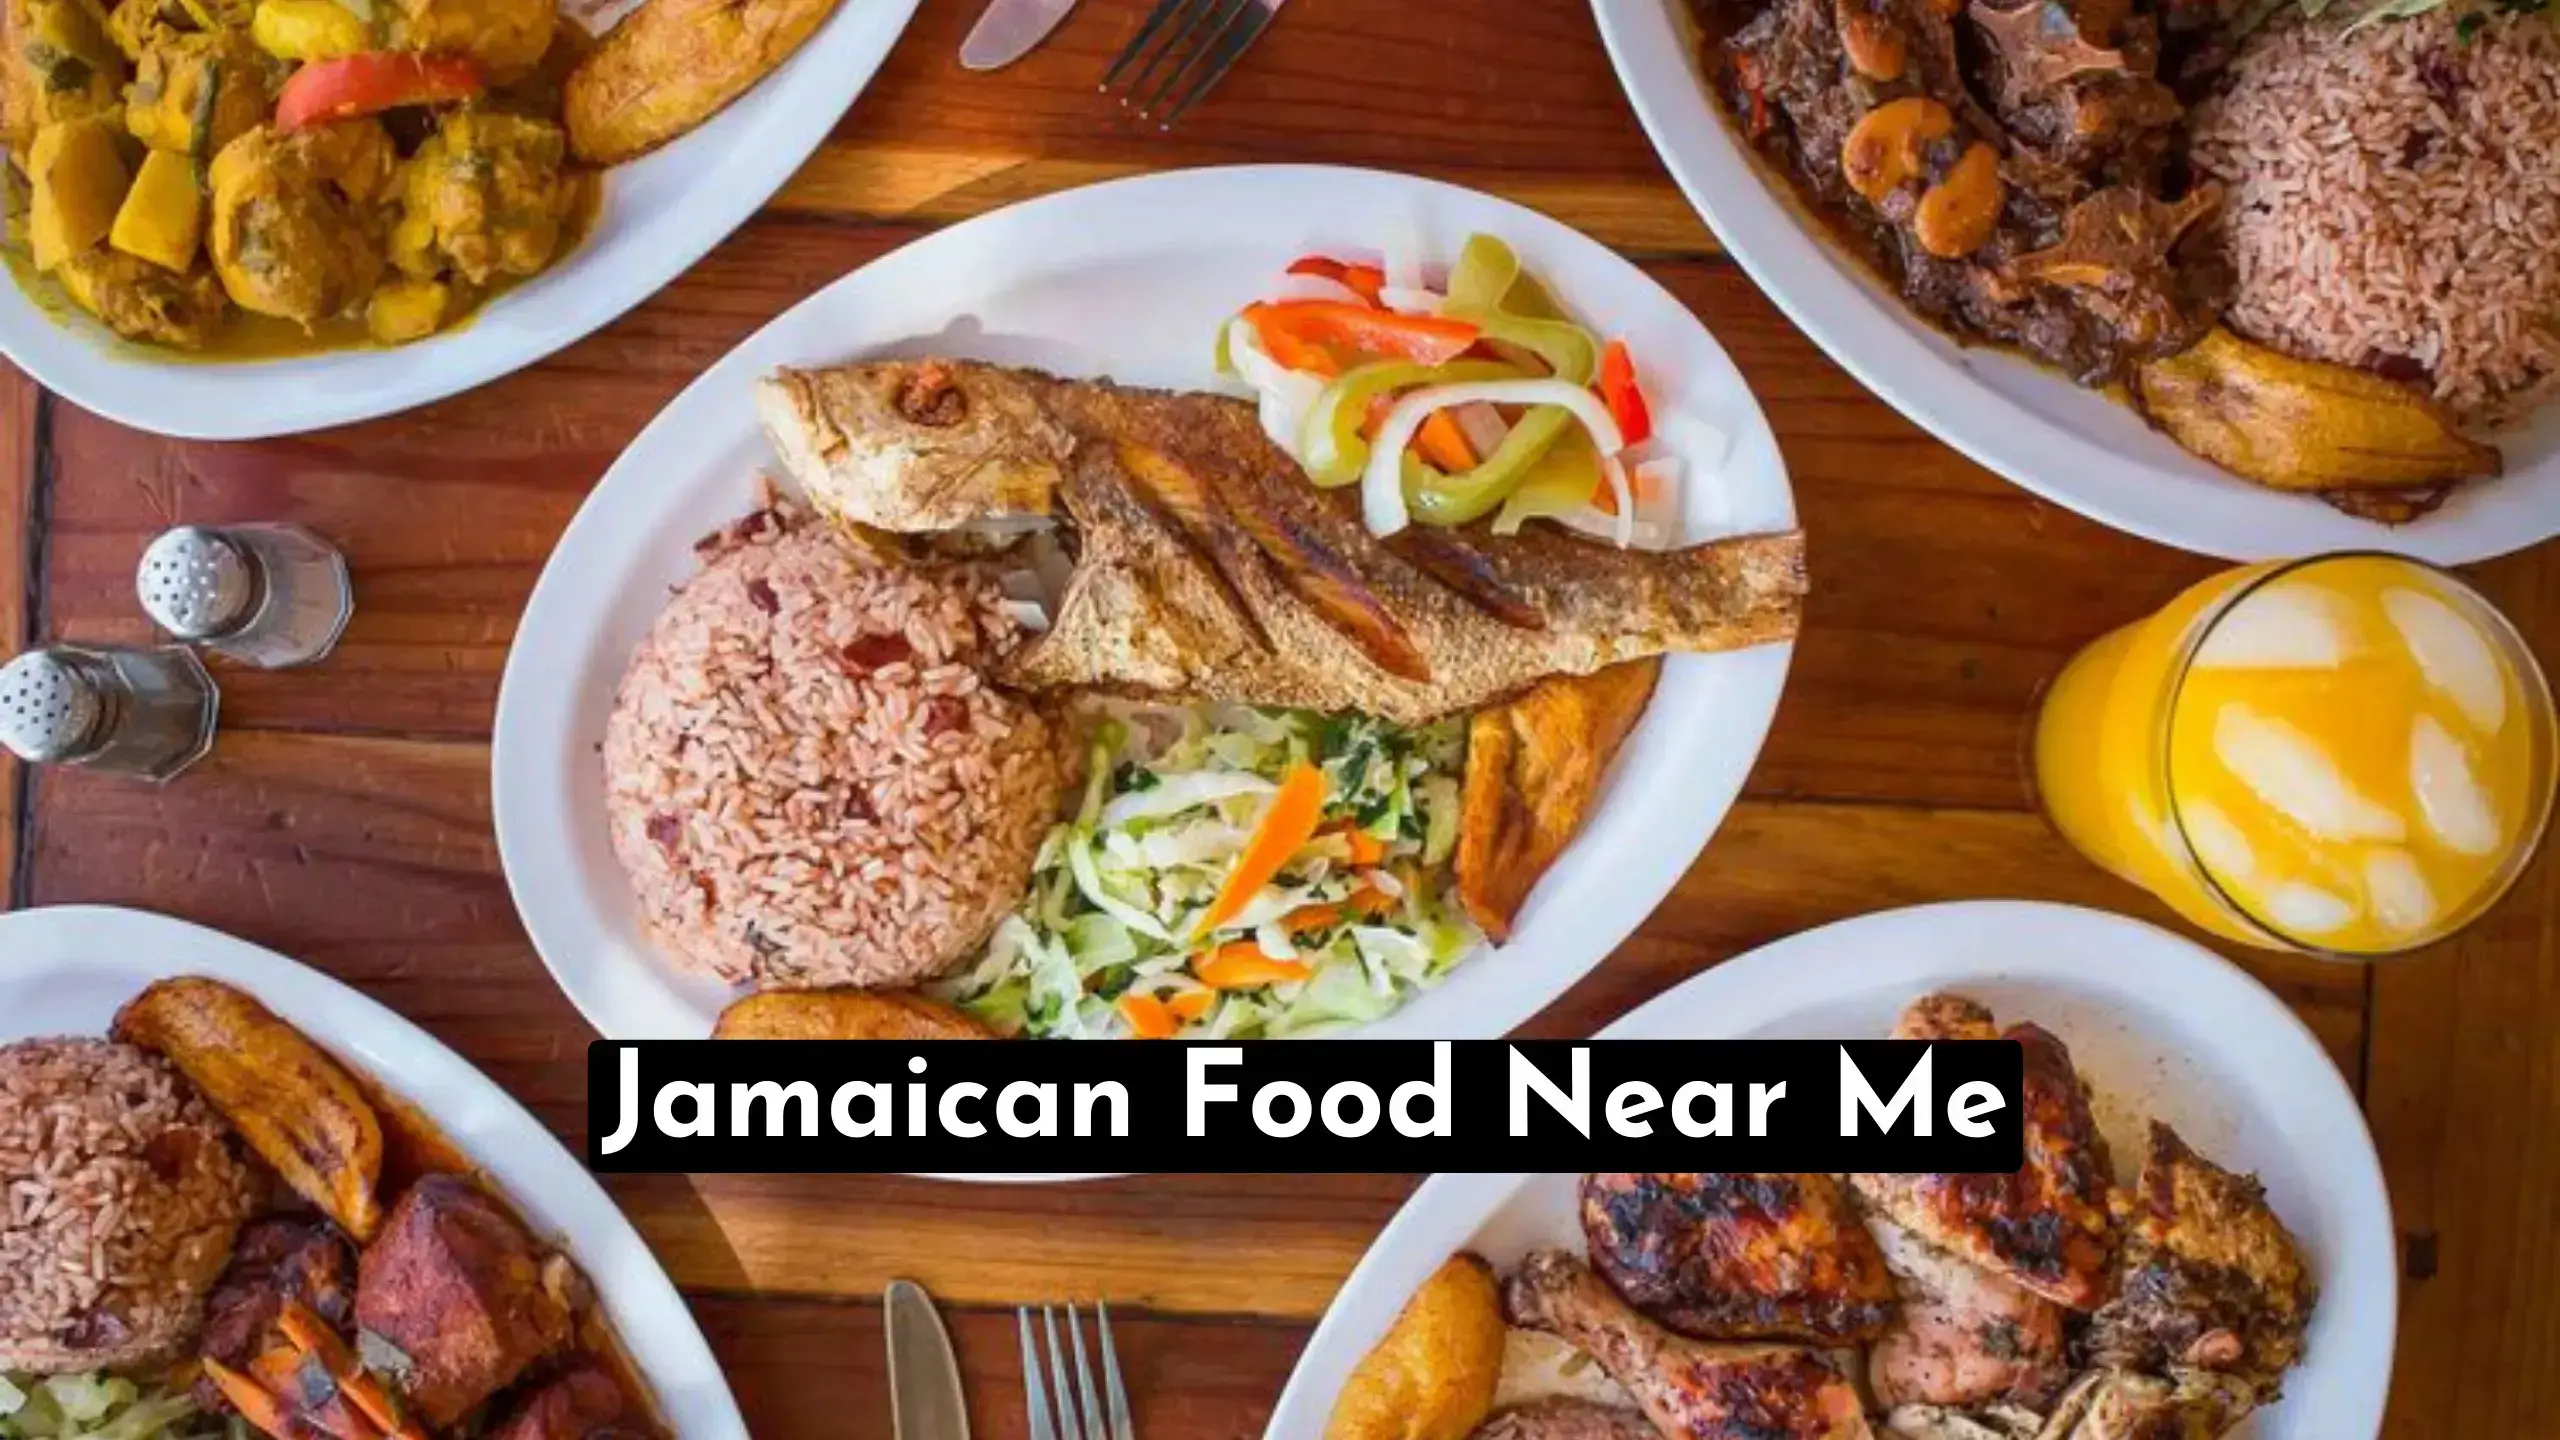 Jamaican Food Near Me: Discover the Best Jamaican Cuisine in Your Area